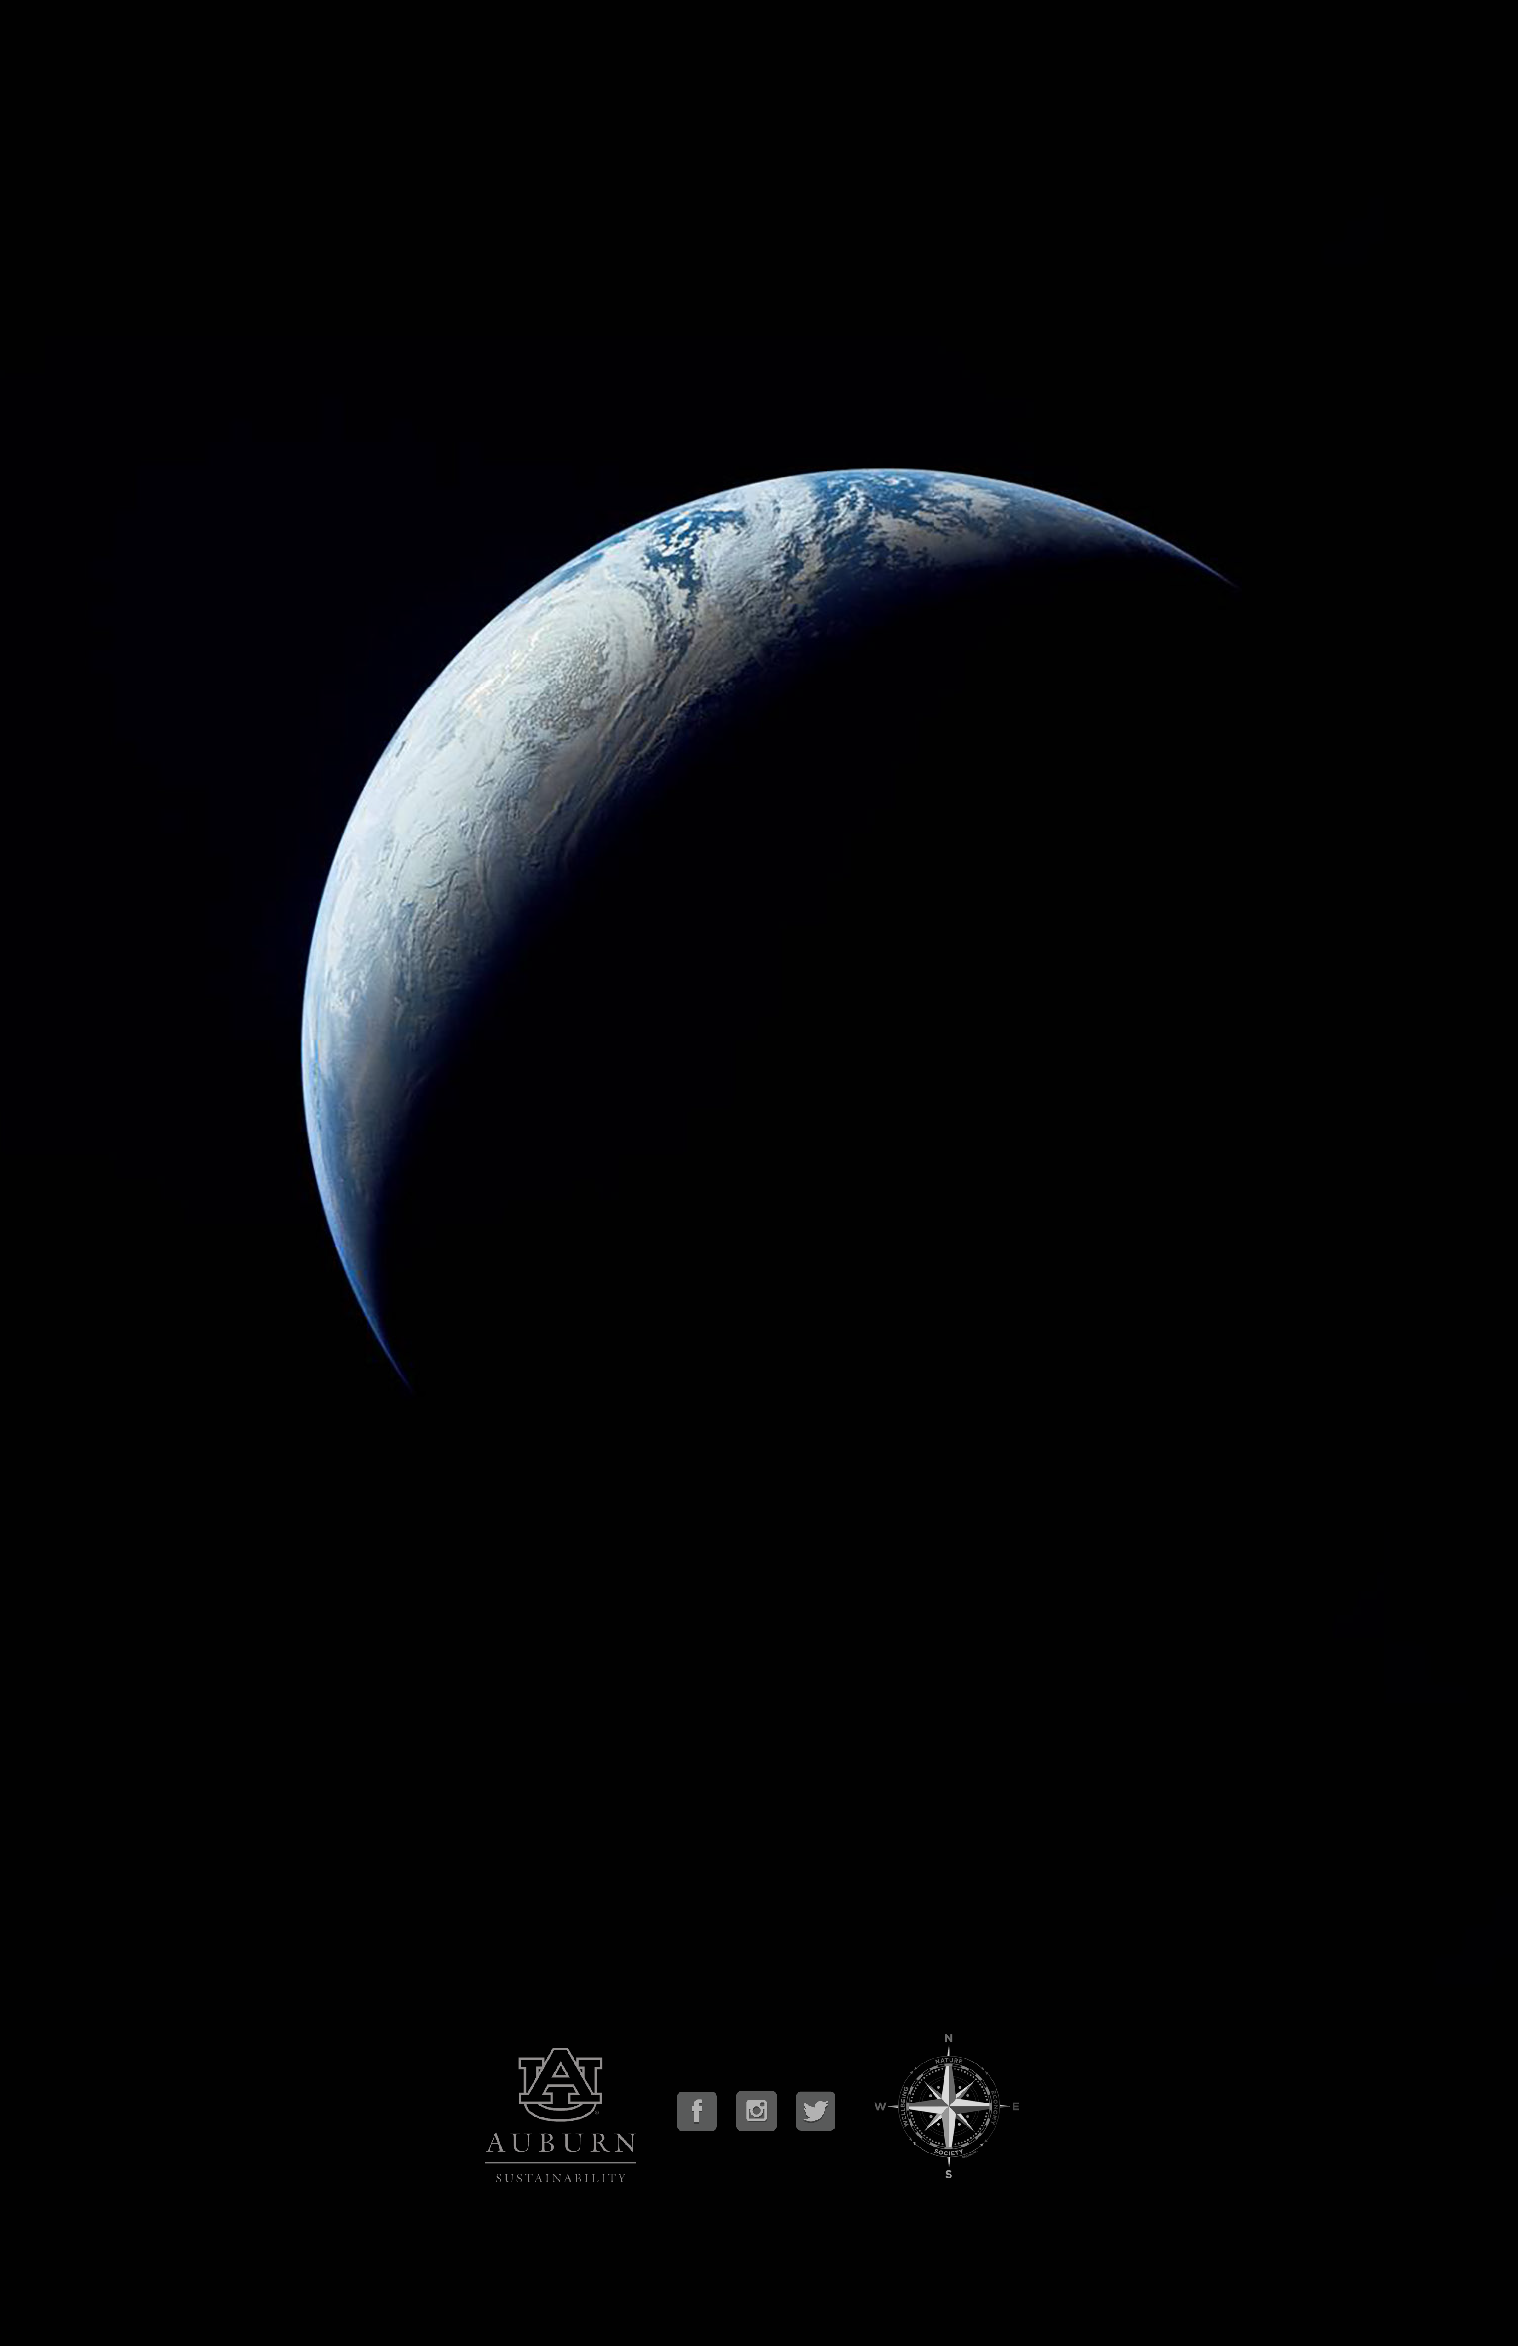 Photo of Earth from outer space.